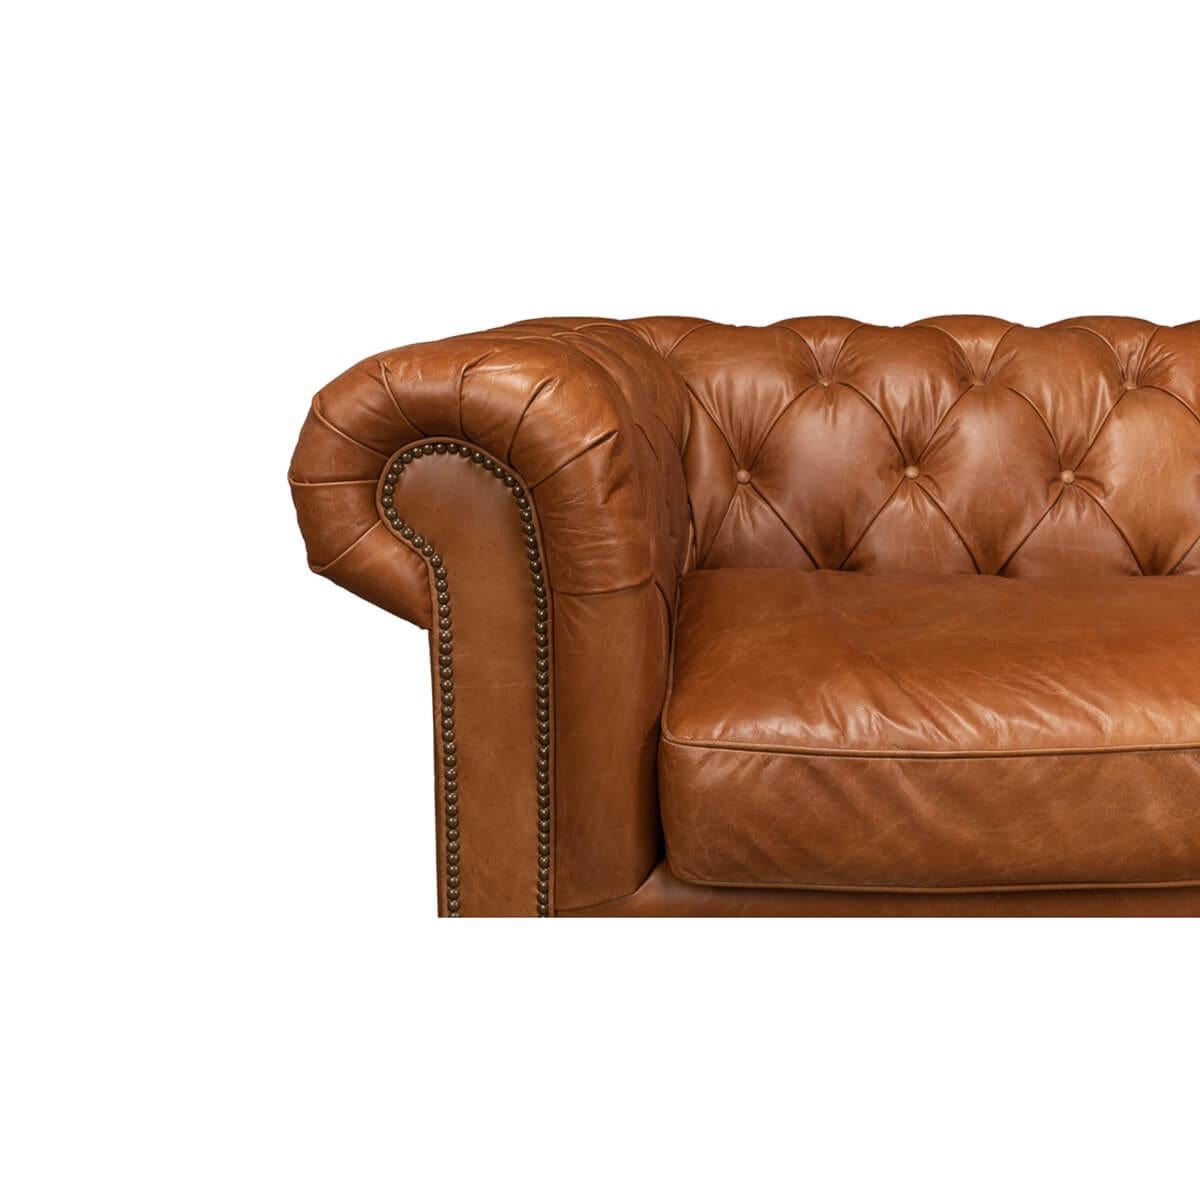 Vintage Style Classic Chesterfield Sofa - Vienna Brown Leather In New Condition For Sale In Westwood, NJ